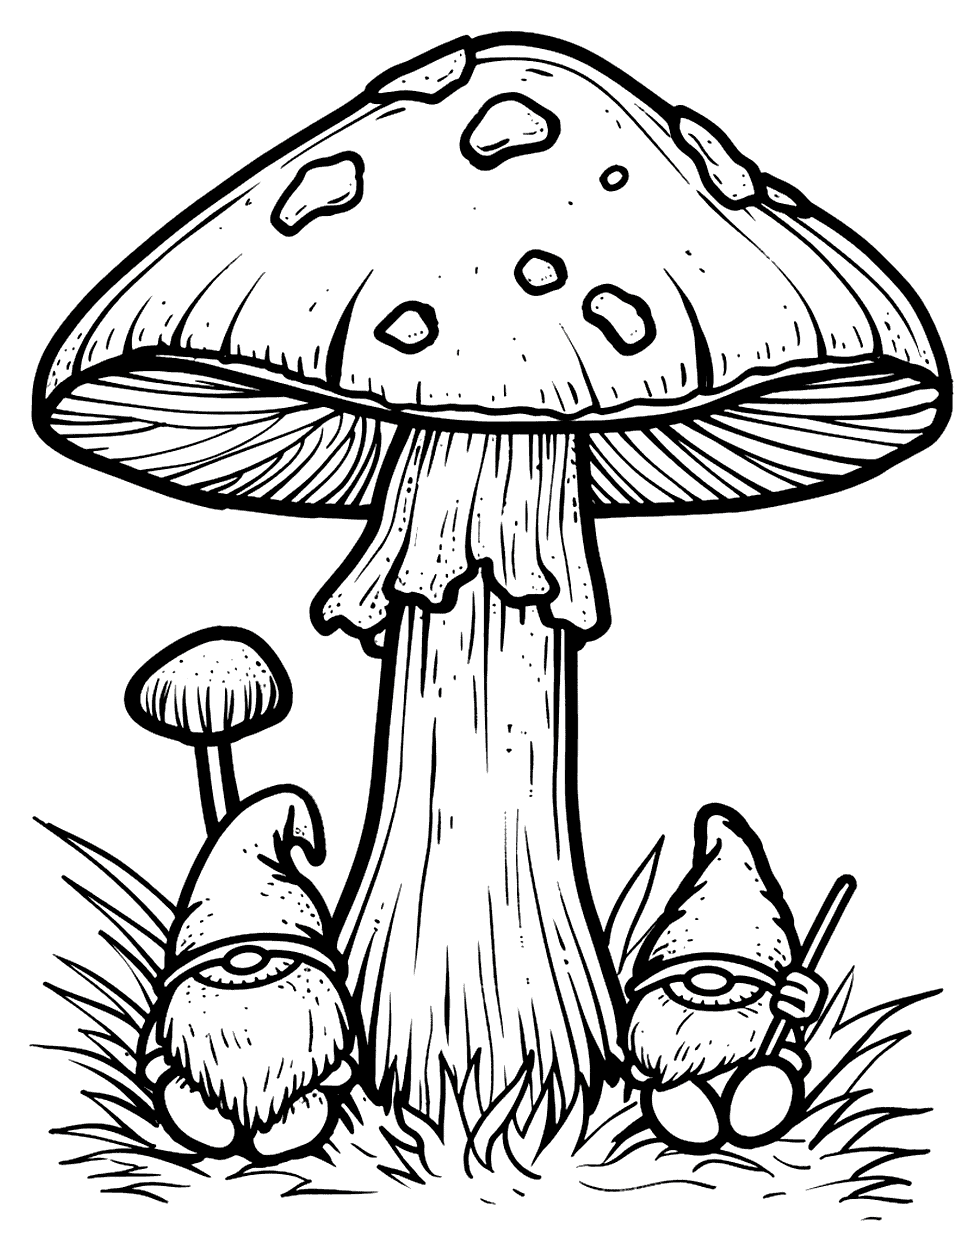 Toadstool and Gnomes Mushroom Coloring Page - A classic toadstool mushroom with small gnomes beside it.